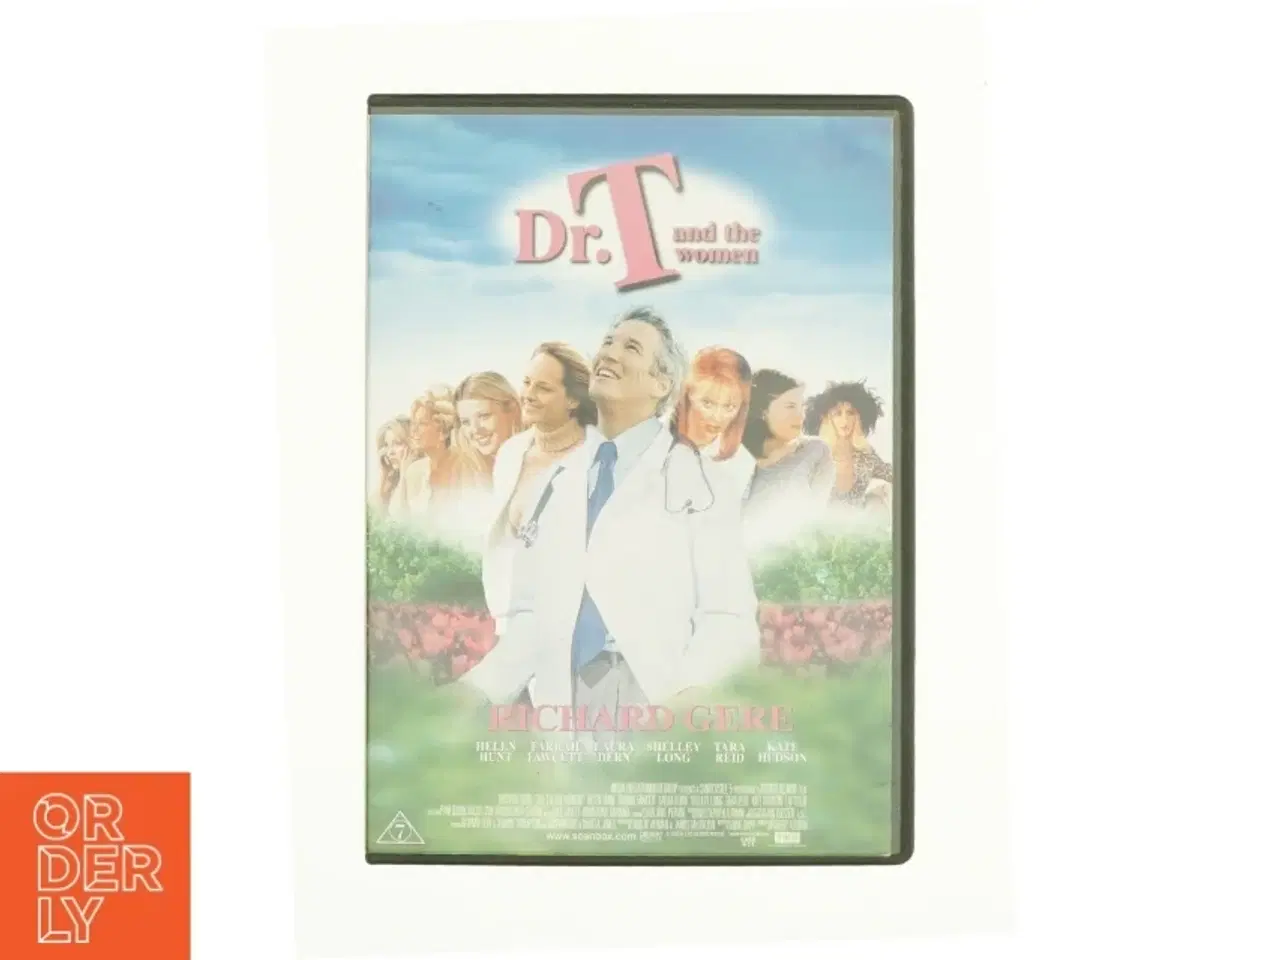 Billede 1 - Dr. T and the woman fra DVD